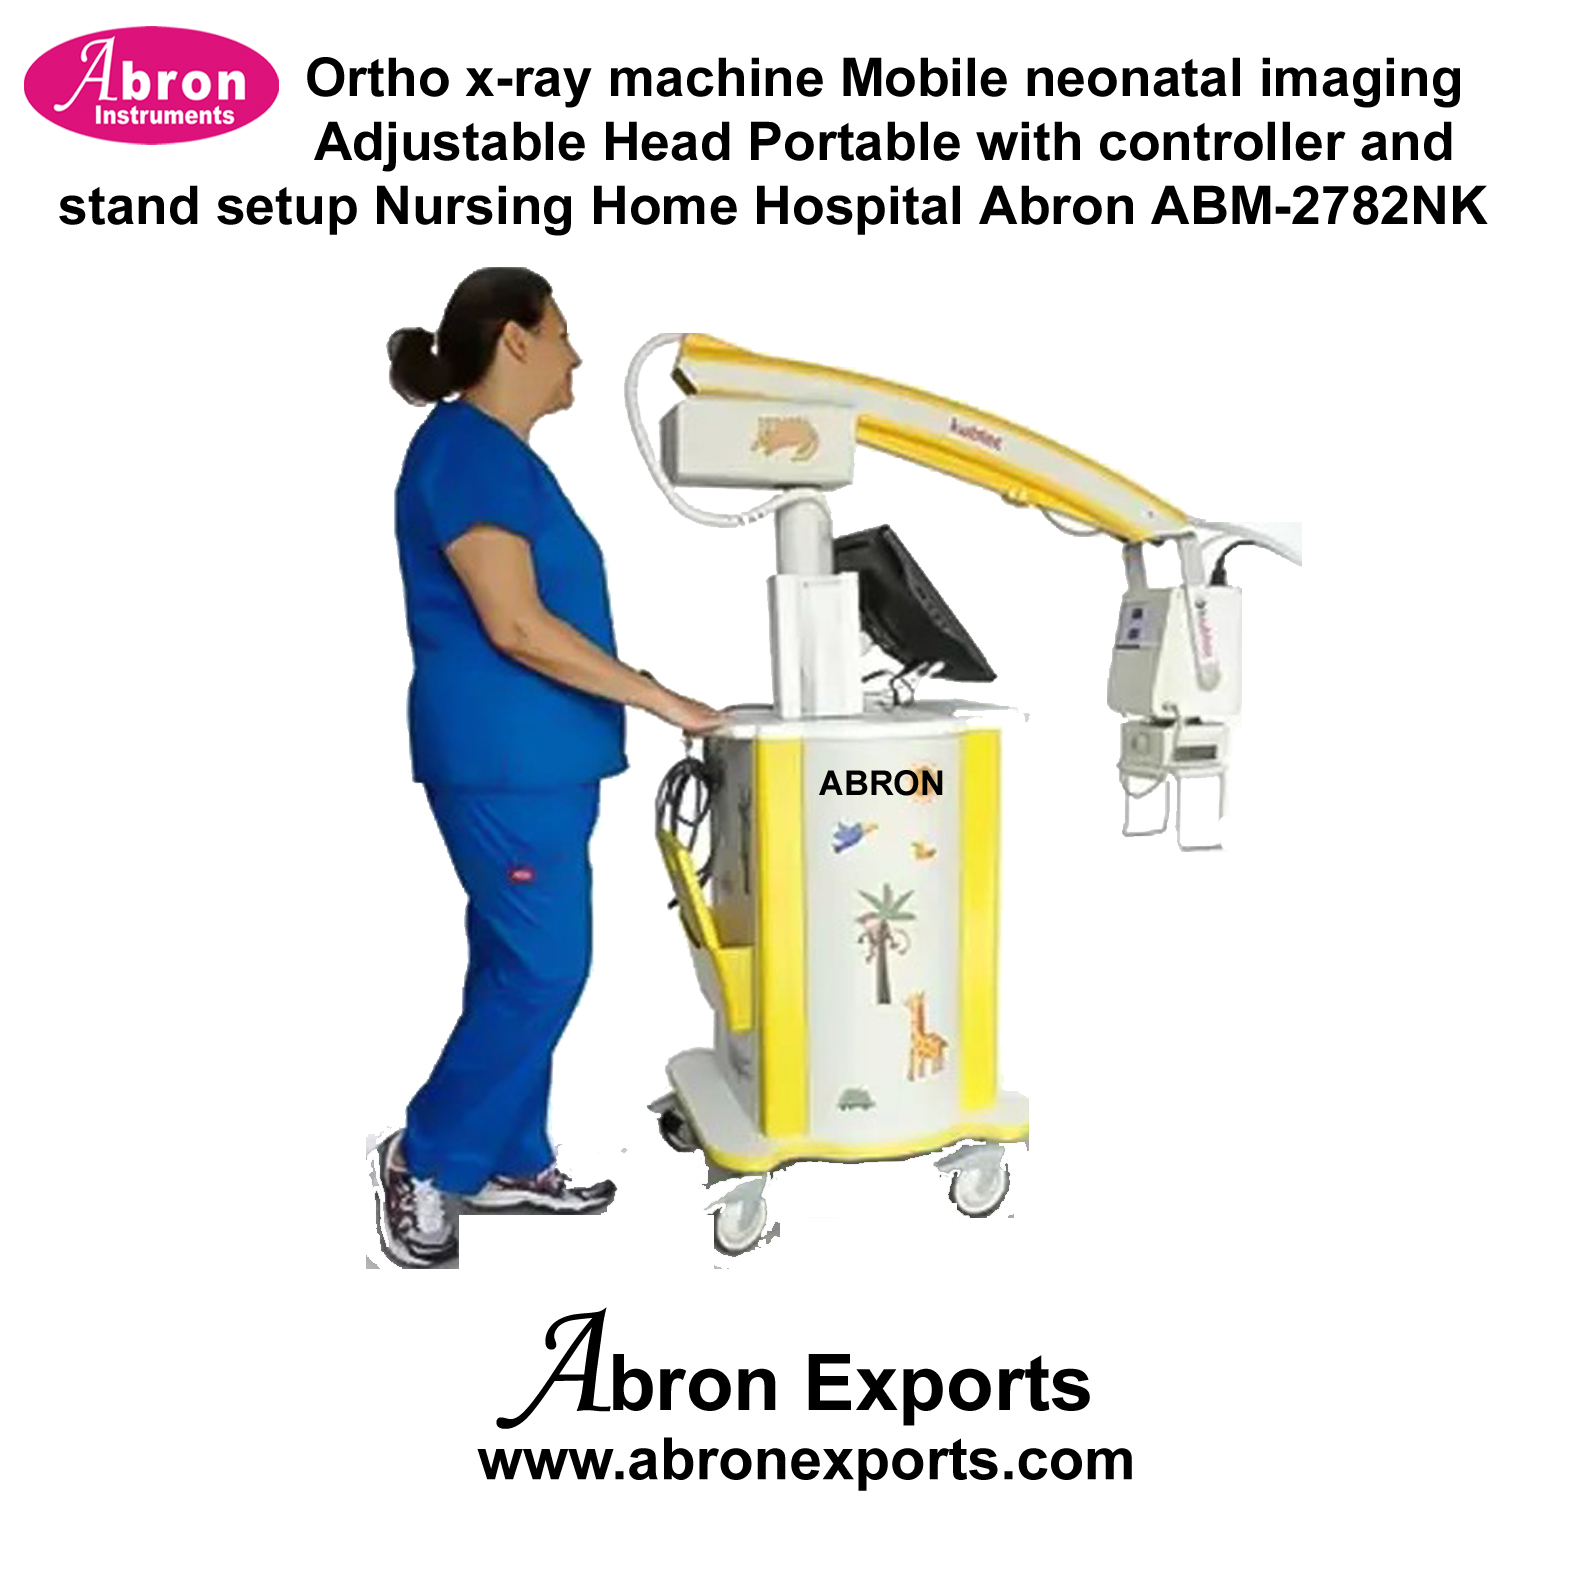 Ortho X-Ray Machine Mobile Neonatal Imaging Adjustable Head Portable with controller and stand setup Nursing Home Hospital Abron ABM-2782NK 